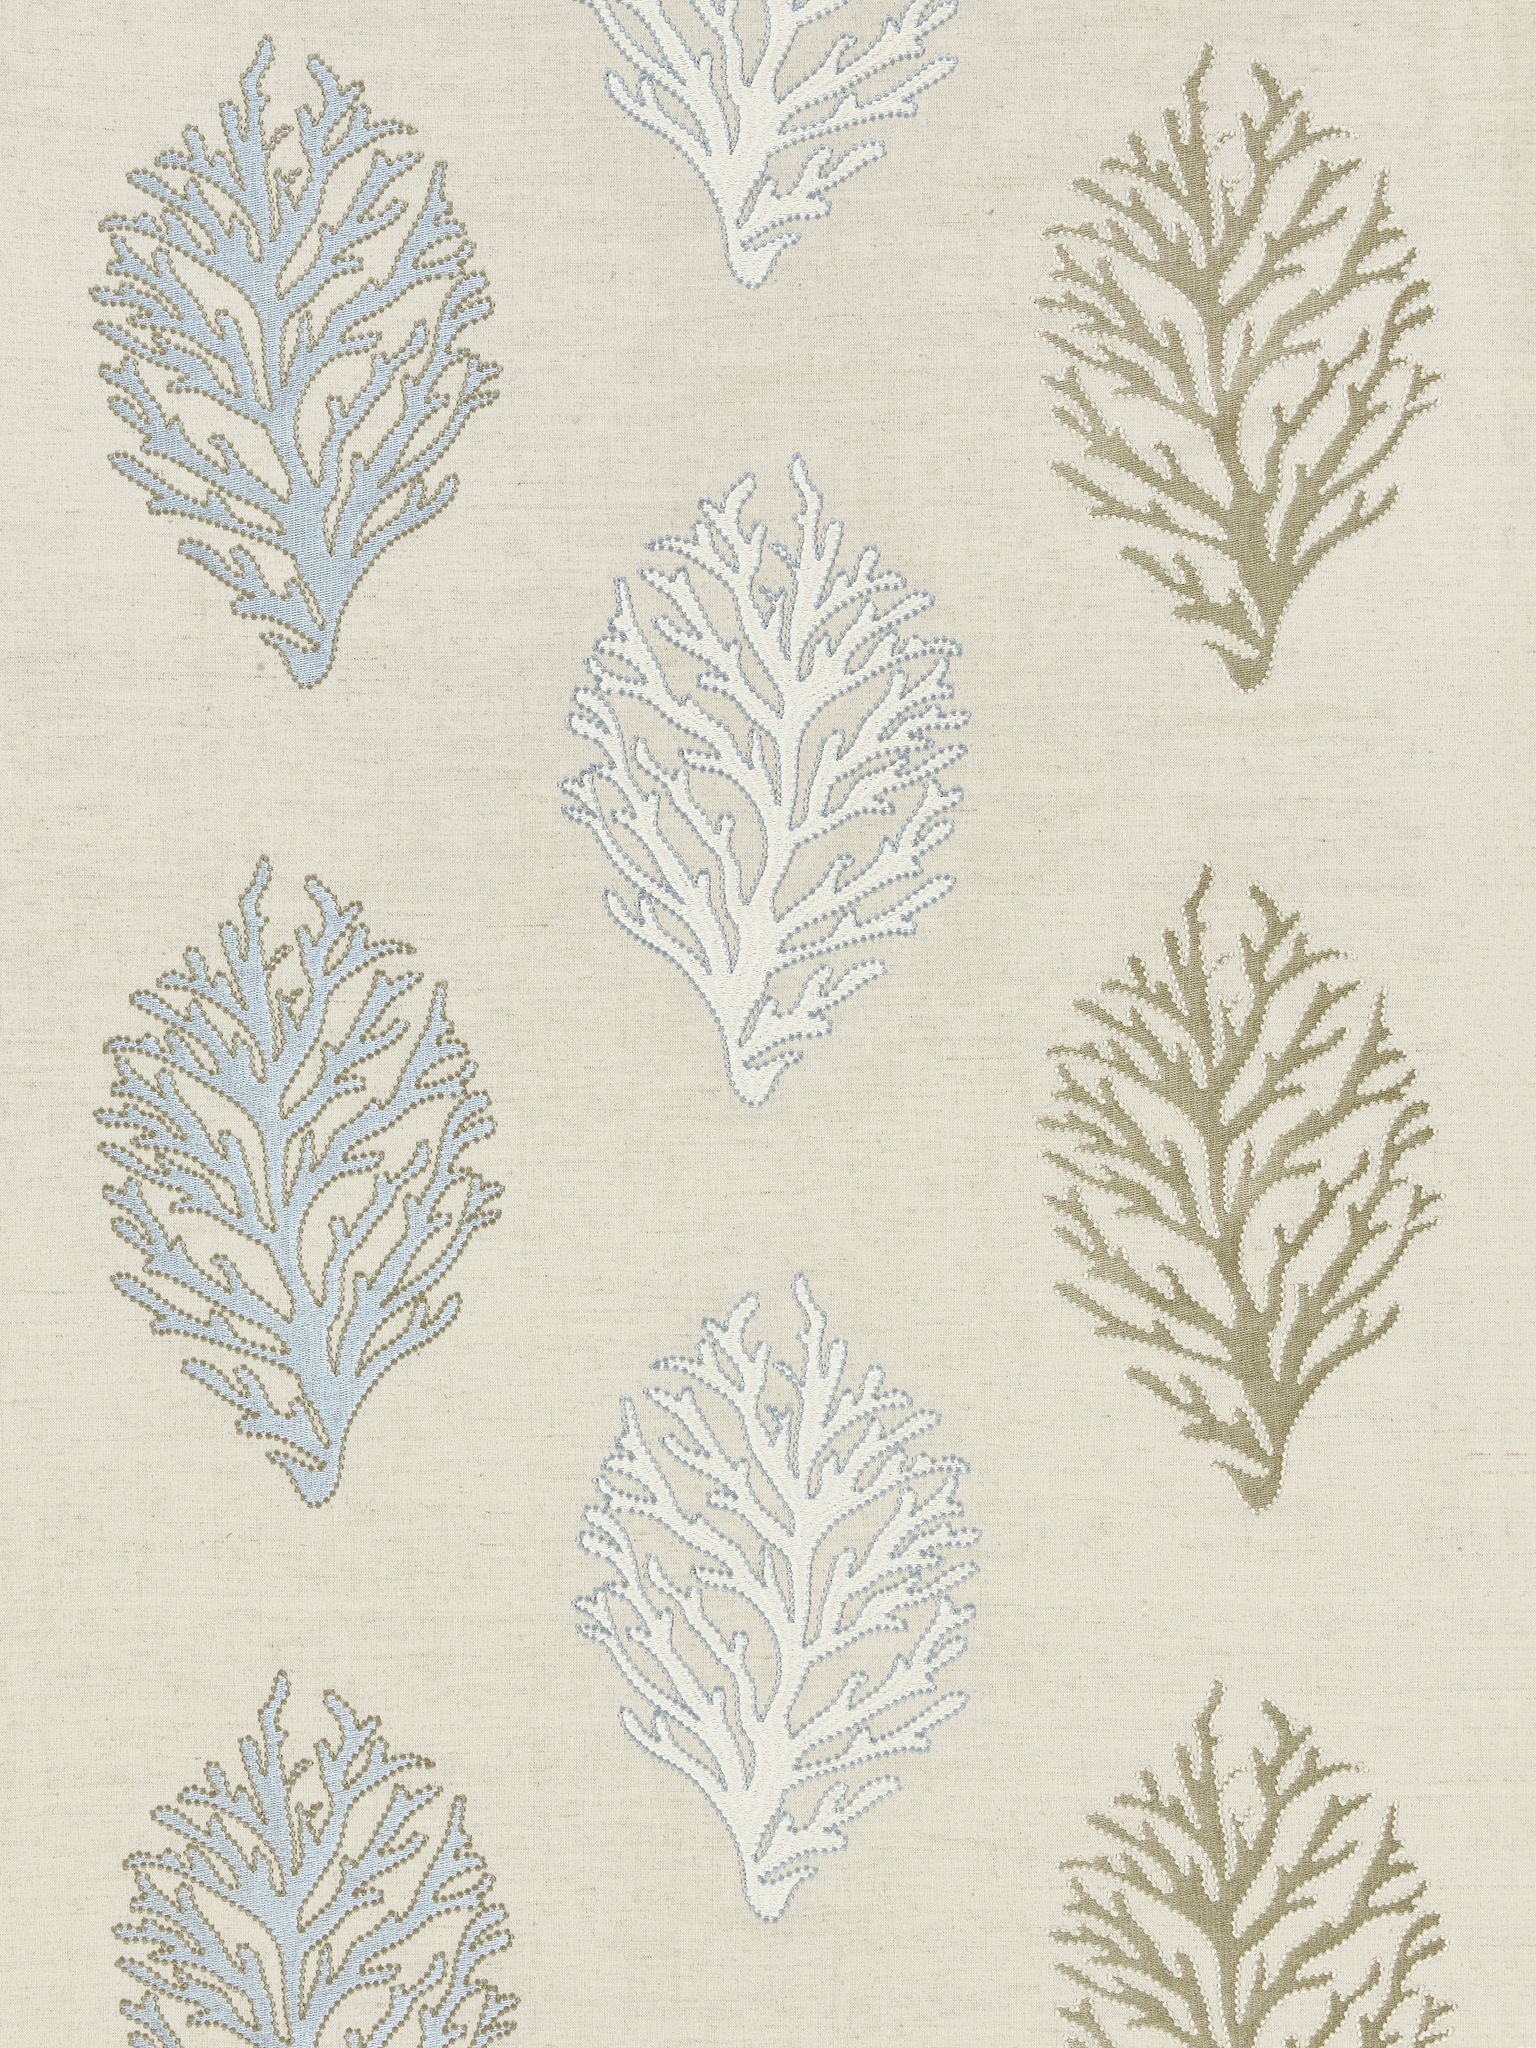 Coral Reef Embroidery fabric in sand color - pattern number GW 000427204 - by Scalamandre in the Grey Watkins collection